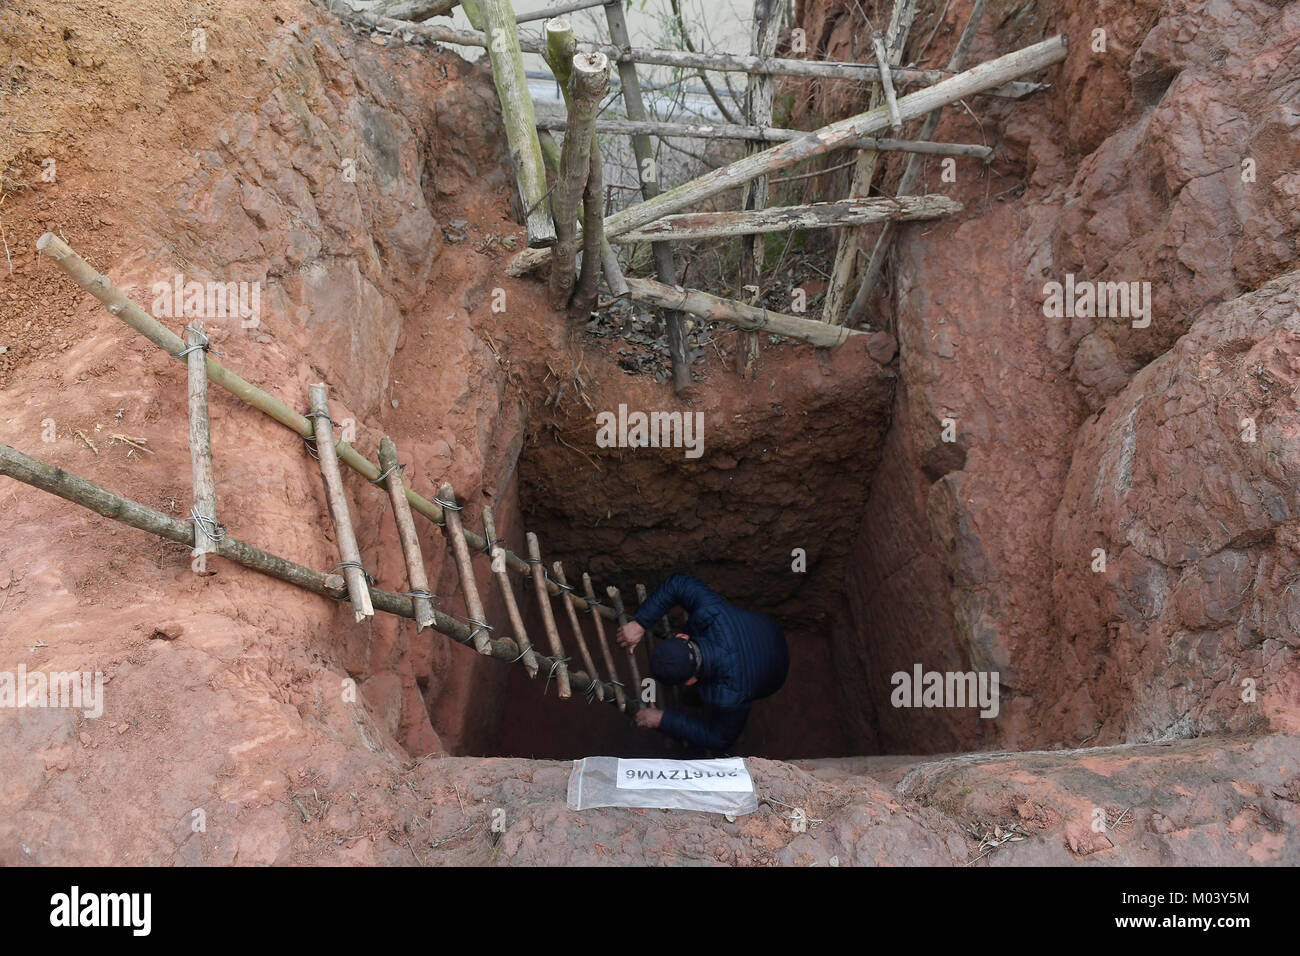 Chengdu, China's Sichuan Province. 18th Jan, 2018. An archaeologist enters a tomb in Zhengxing Town of Chengdu, capital of southwest China's Sichuan Province, Jan. 18, 2018. More than 200 cave burial sites dating back to the Han Dynasty and Wei-Jin period (206 B.C.-420 A.D.) were found on high cliffs facing the Jinjiang River, which runs through the city. Credit: Liu Kun/Xinhua/Alamy Live News Stock Photo